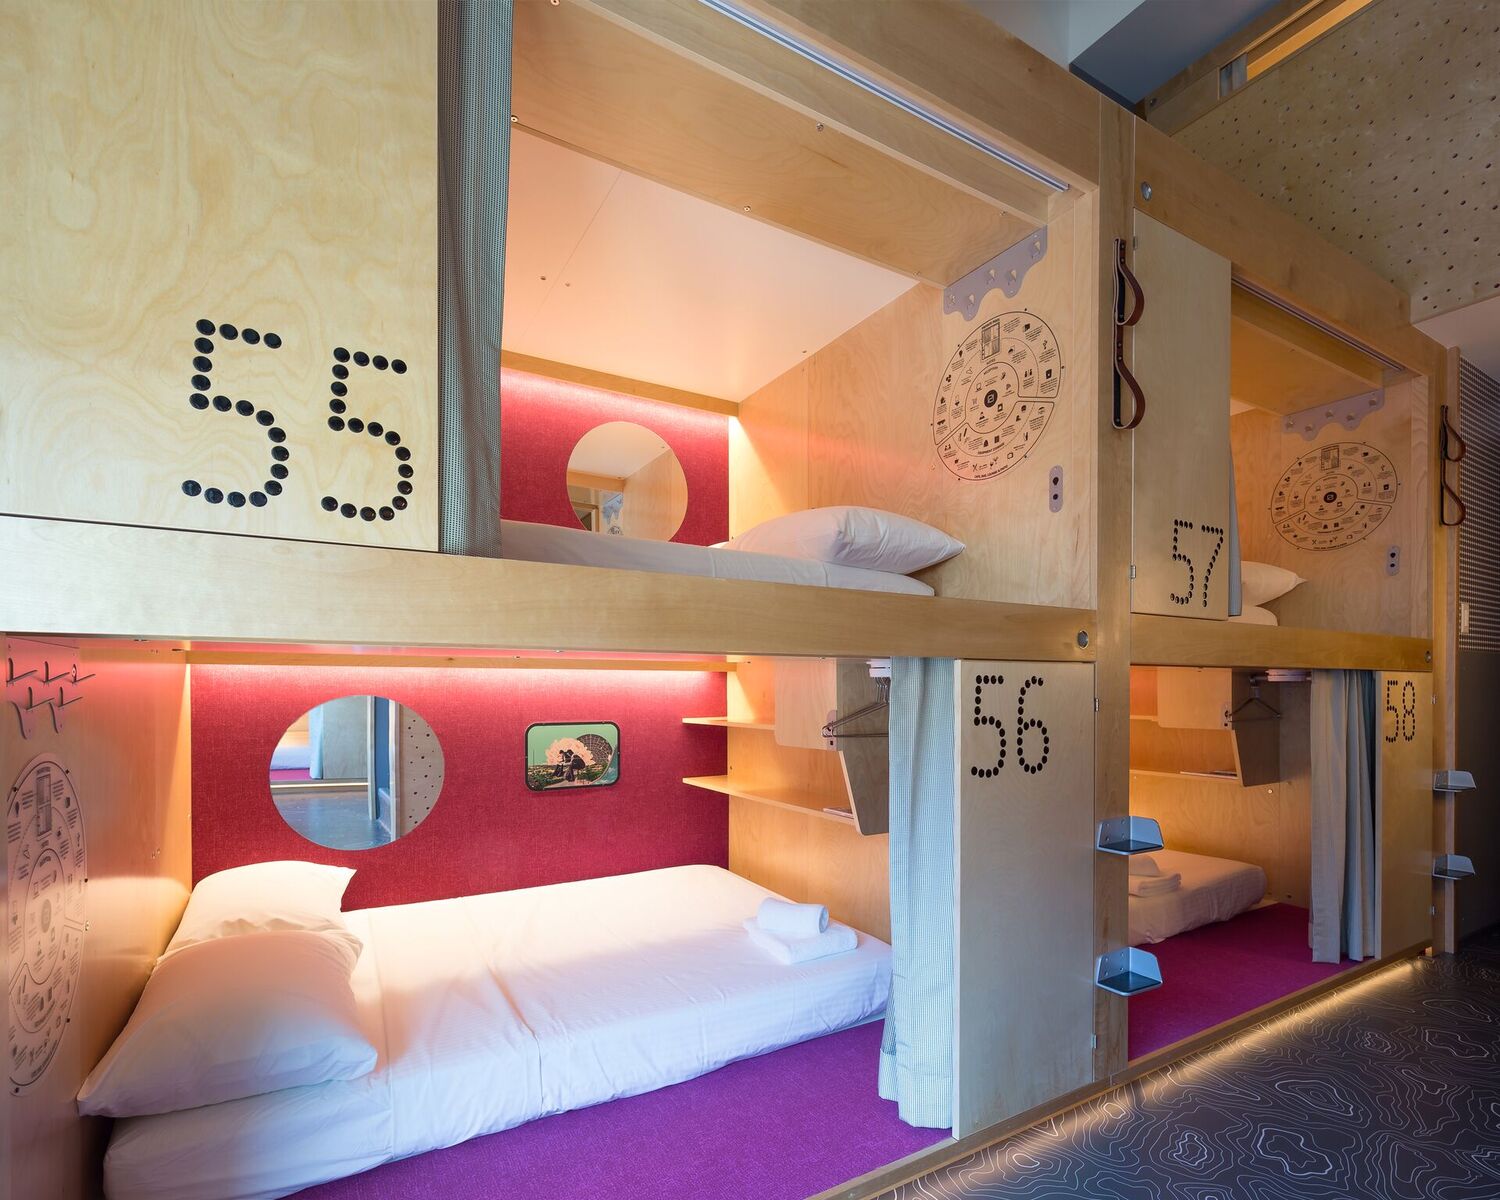 Suite-entry pods numbered 55-58 with purple carpets, double beds with white linens and privacy curtains.